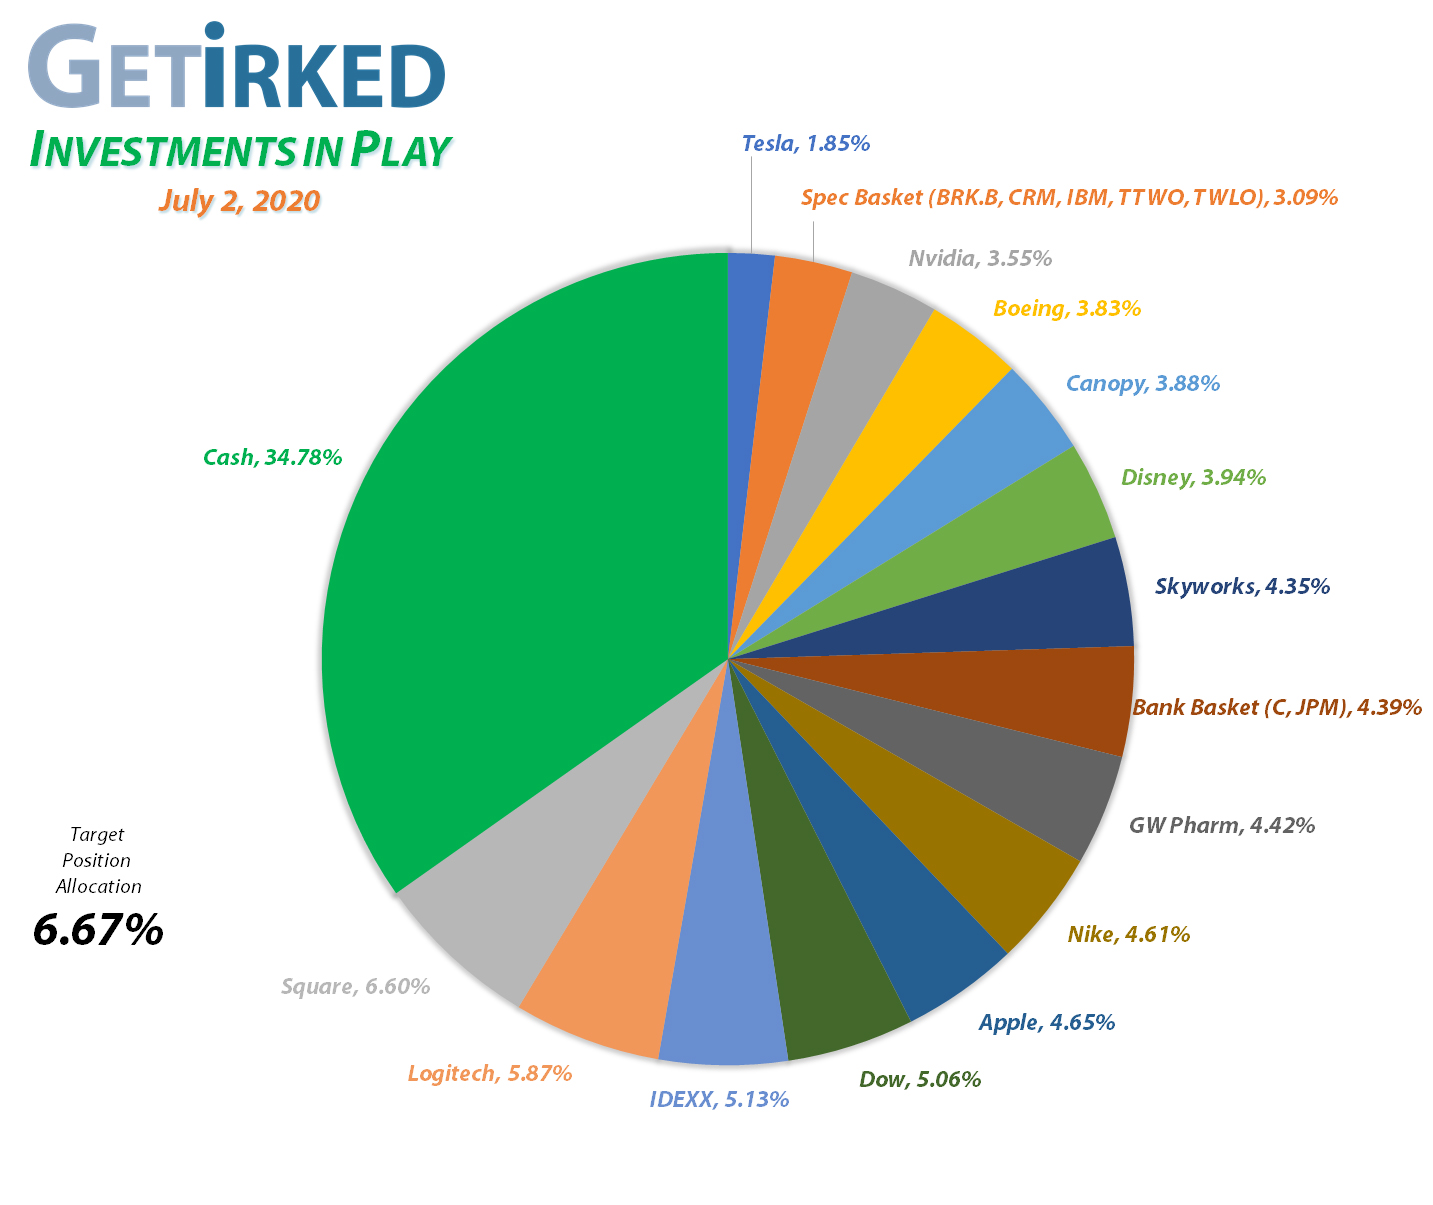 Get Irked - Investments in Play - Current Holdings - July 2, 2020